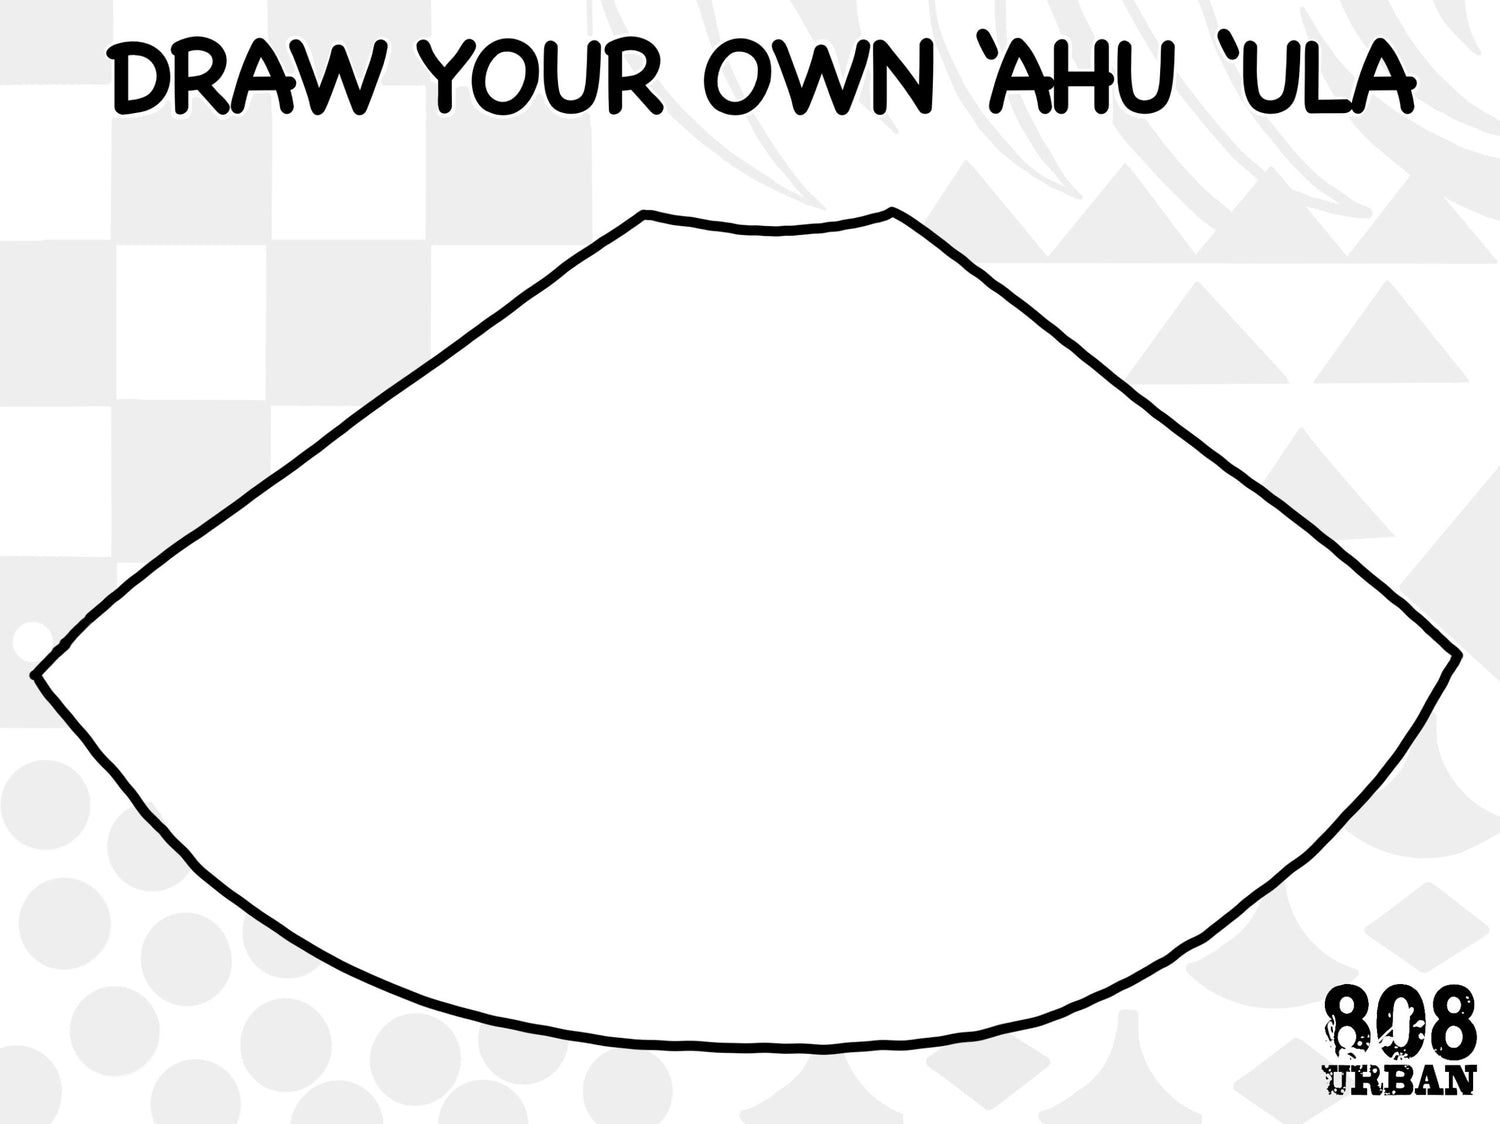 Draw your own ‘Ahu ‘Ula